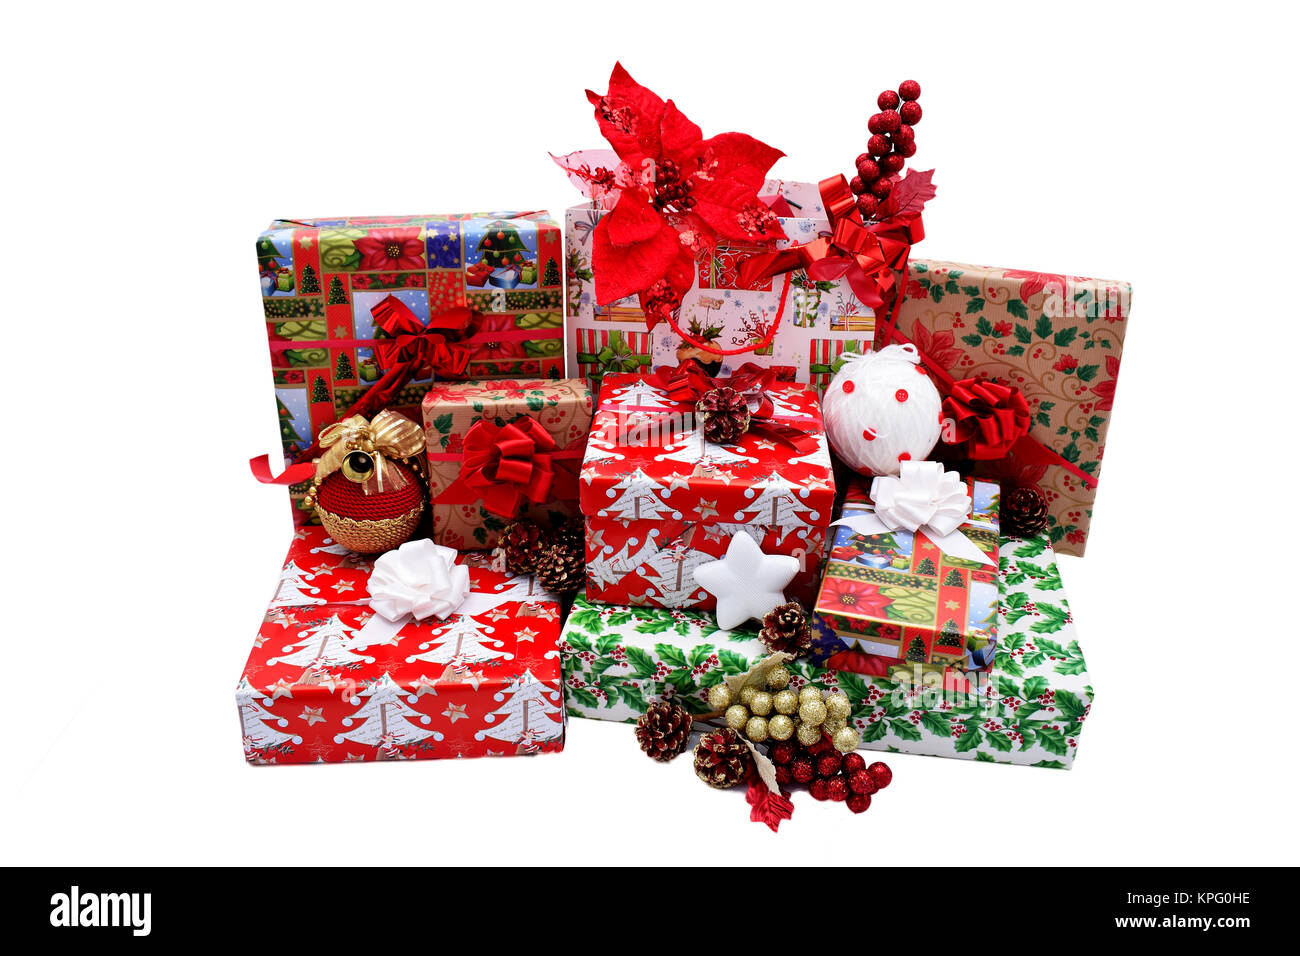 Christmas gifts in boxes and bags, wrapped in themed paper. Decorations with red decorative flowers, Christmas white and golden globes and pine cones Stock Photo